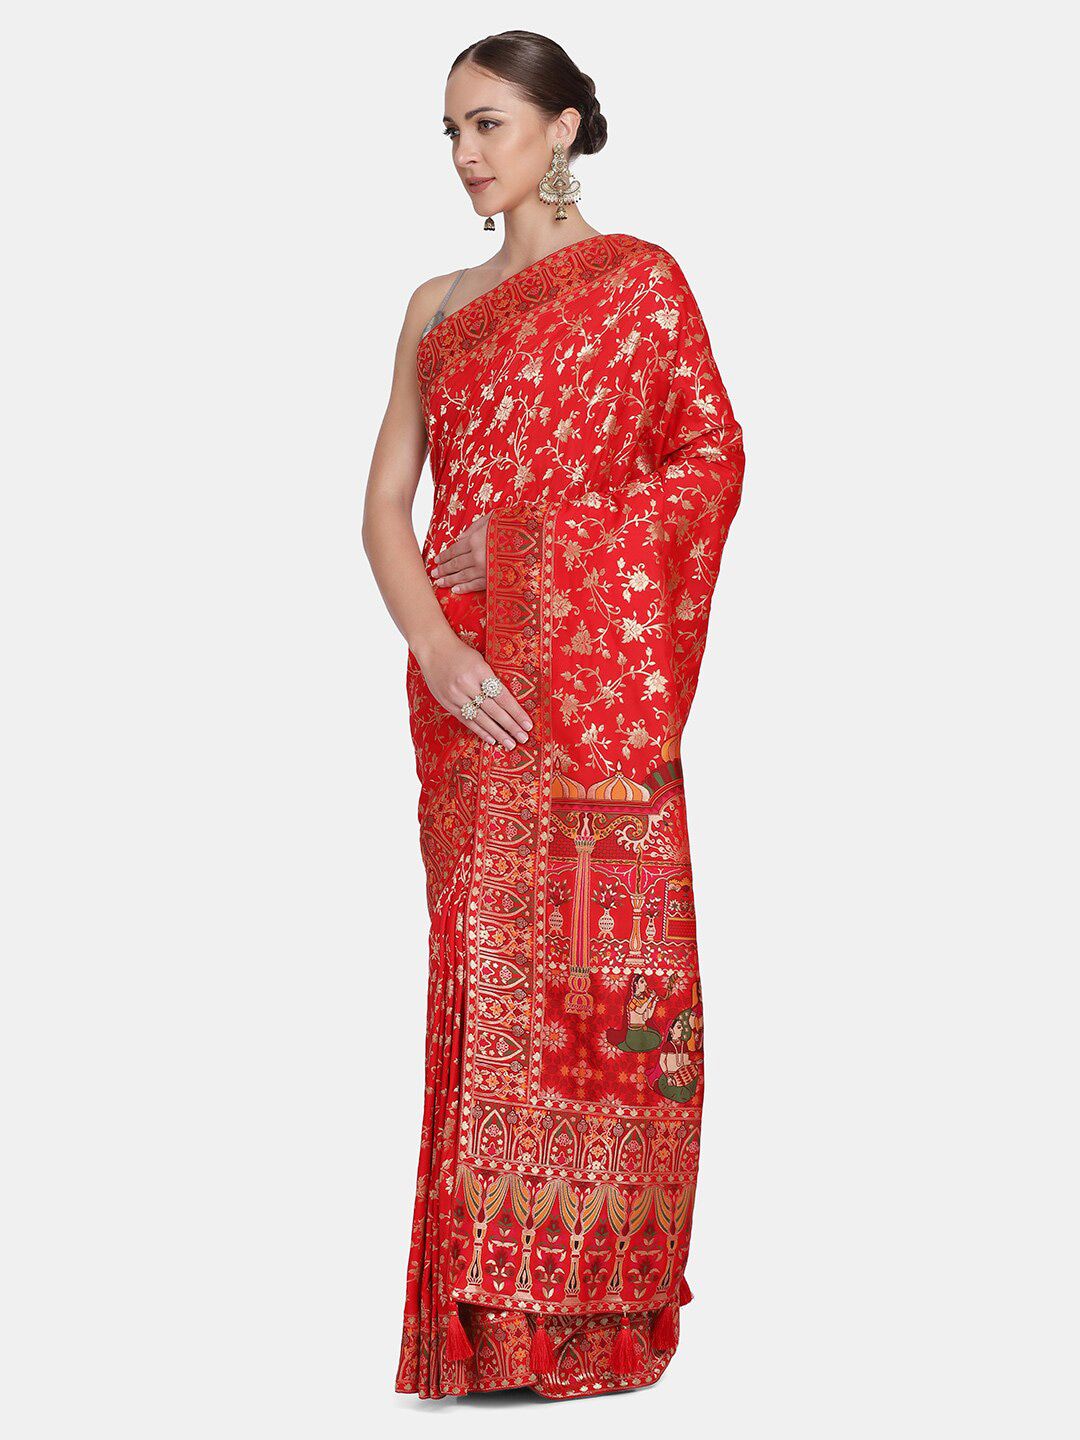 BOMBAY SELECTIONS Red & Silver-Toned Woven Design Pure Silk Banarasi Saree Price in India